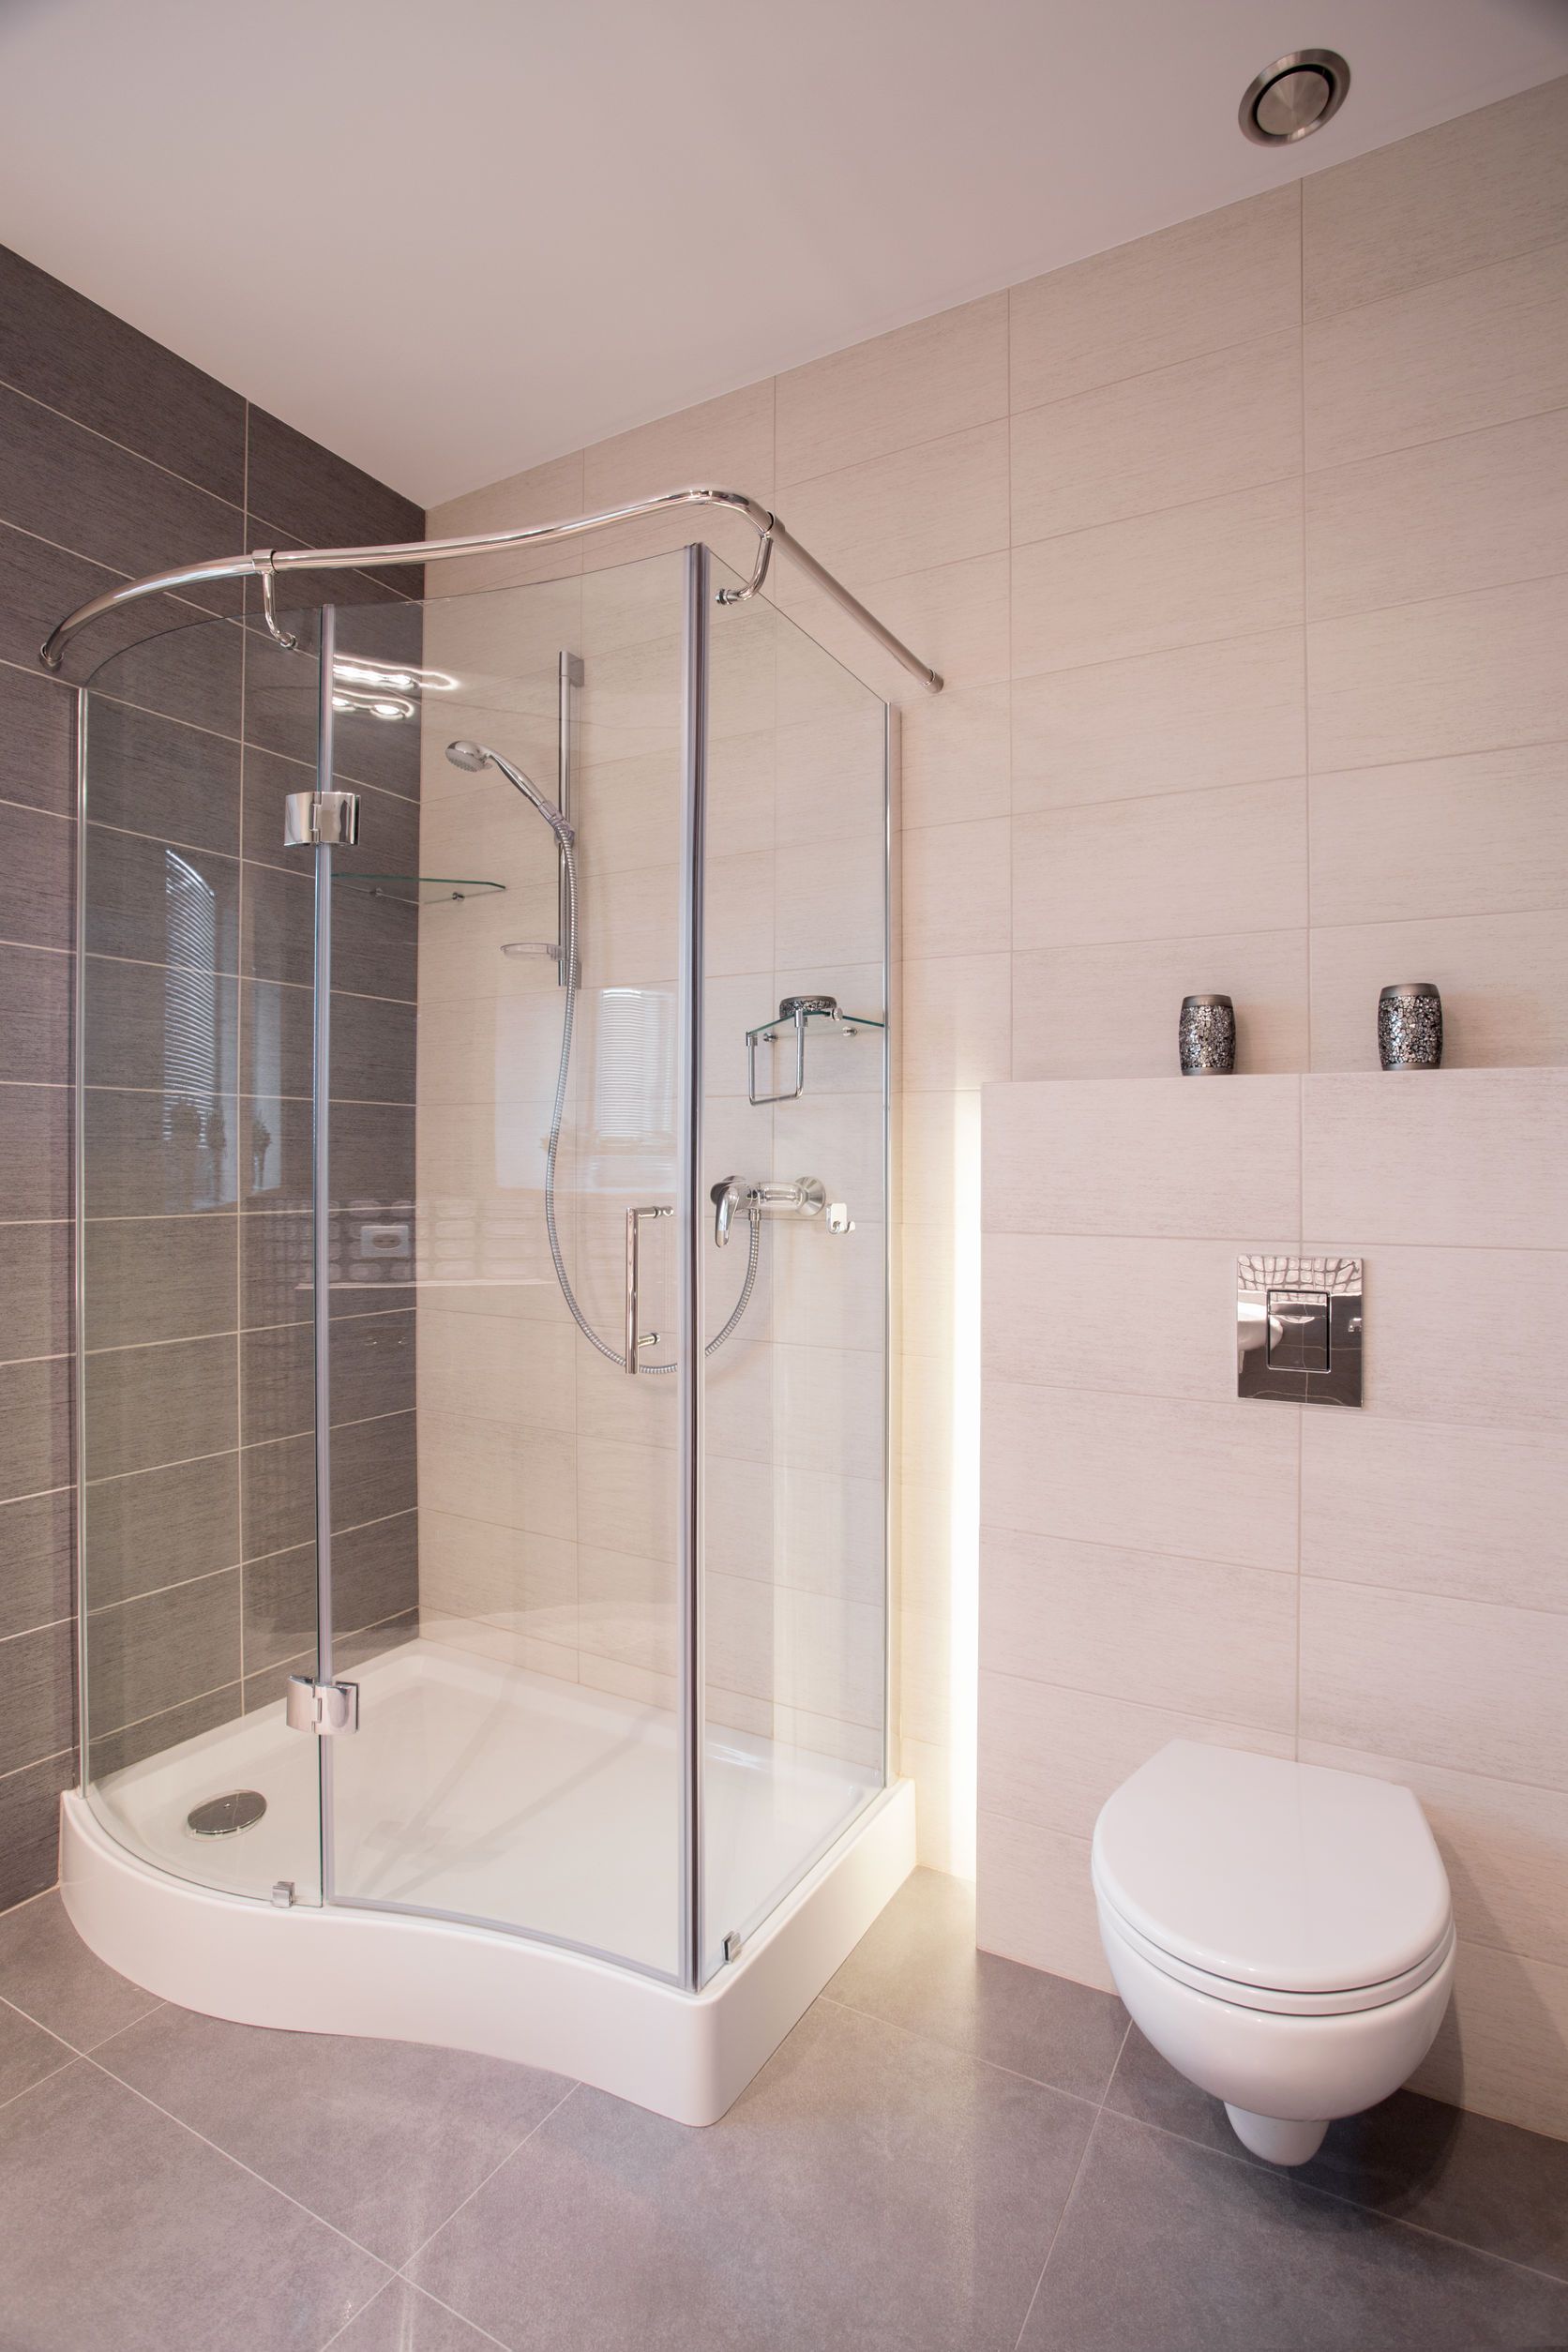 Glass shower and porcelain toilet in new bathroom